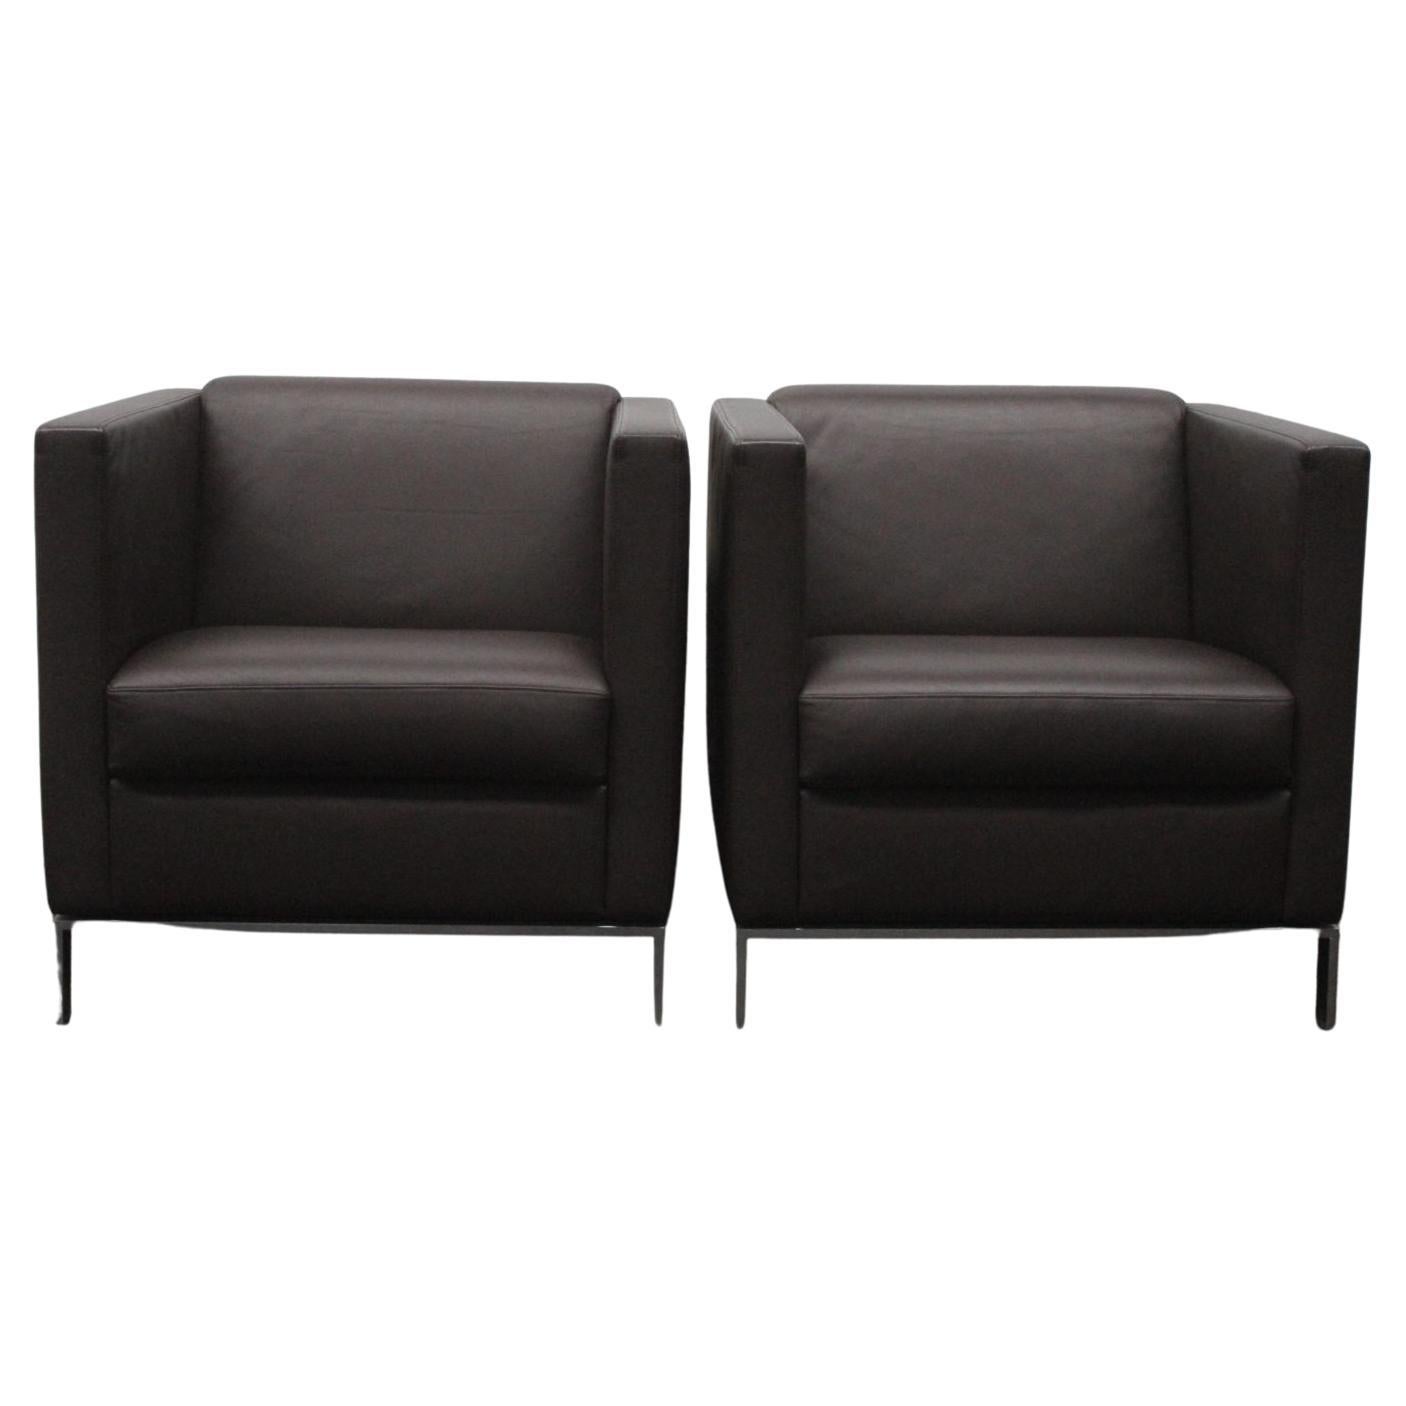 Pair of Walter Knoll “Foster 500.10” Armchairs – in Dark-Brown Leather